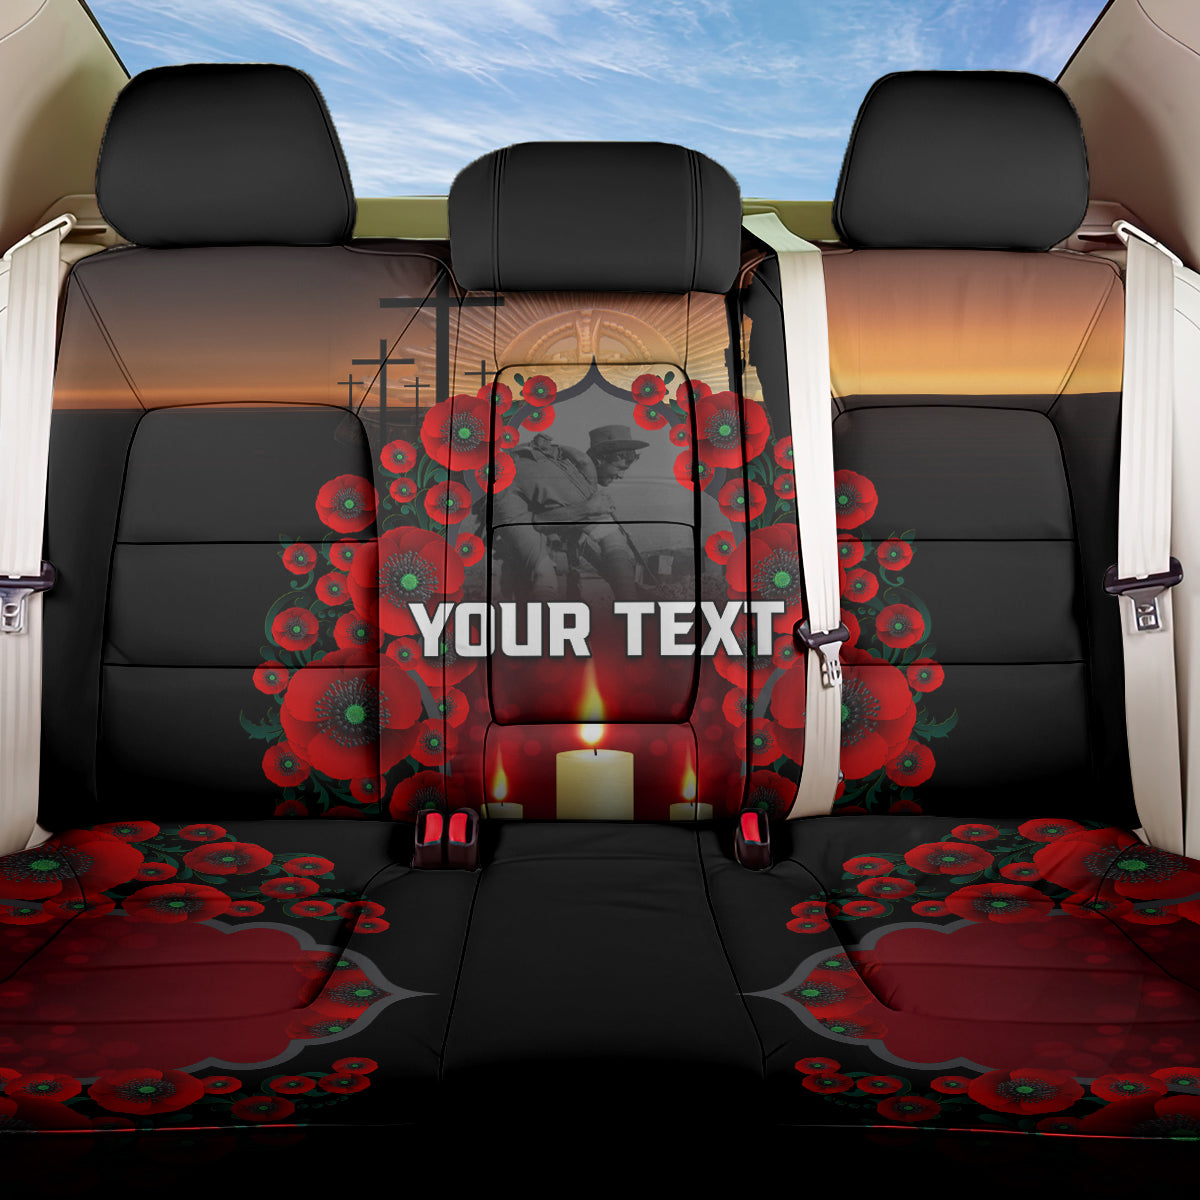 Custom New Zealand and Australia ANZAC Day Back Car Seat Cover Gallipoli and Canlelight Lest We Forget LT03 One Size Black - Polynesian Pride